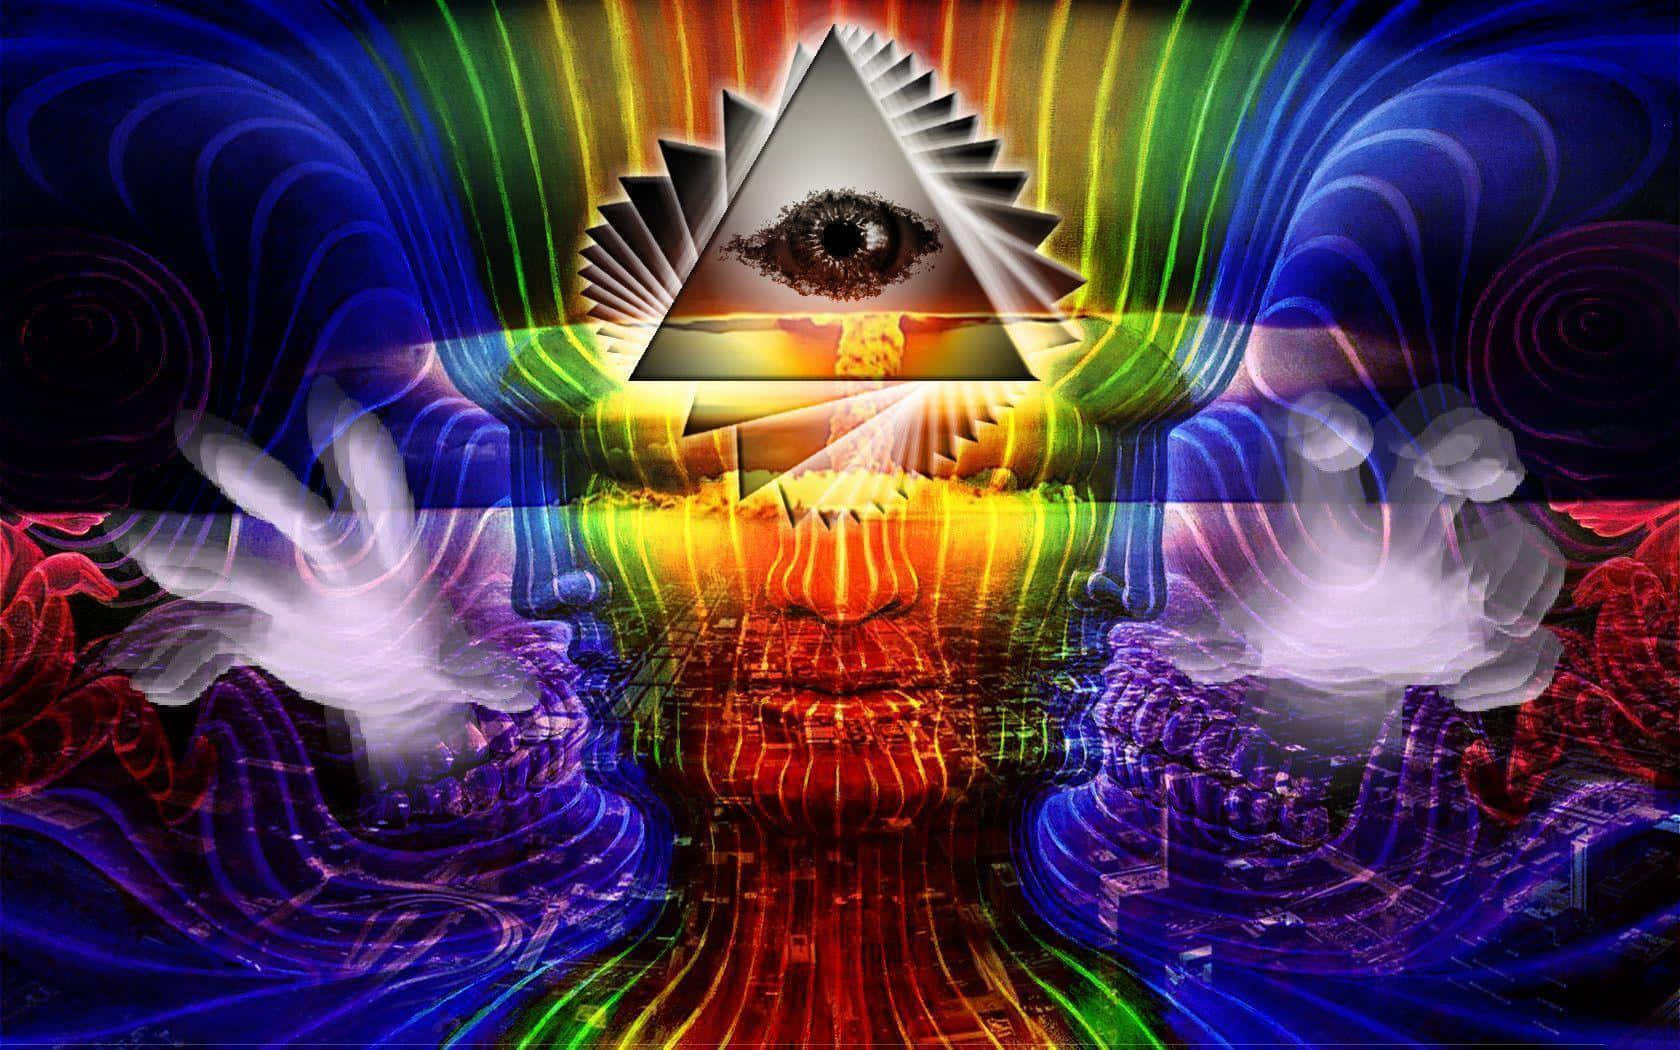 A Colorful Image Of An All Seeing Eye